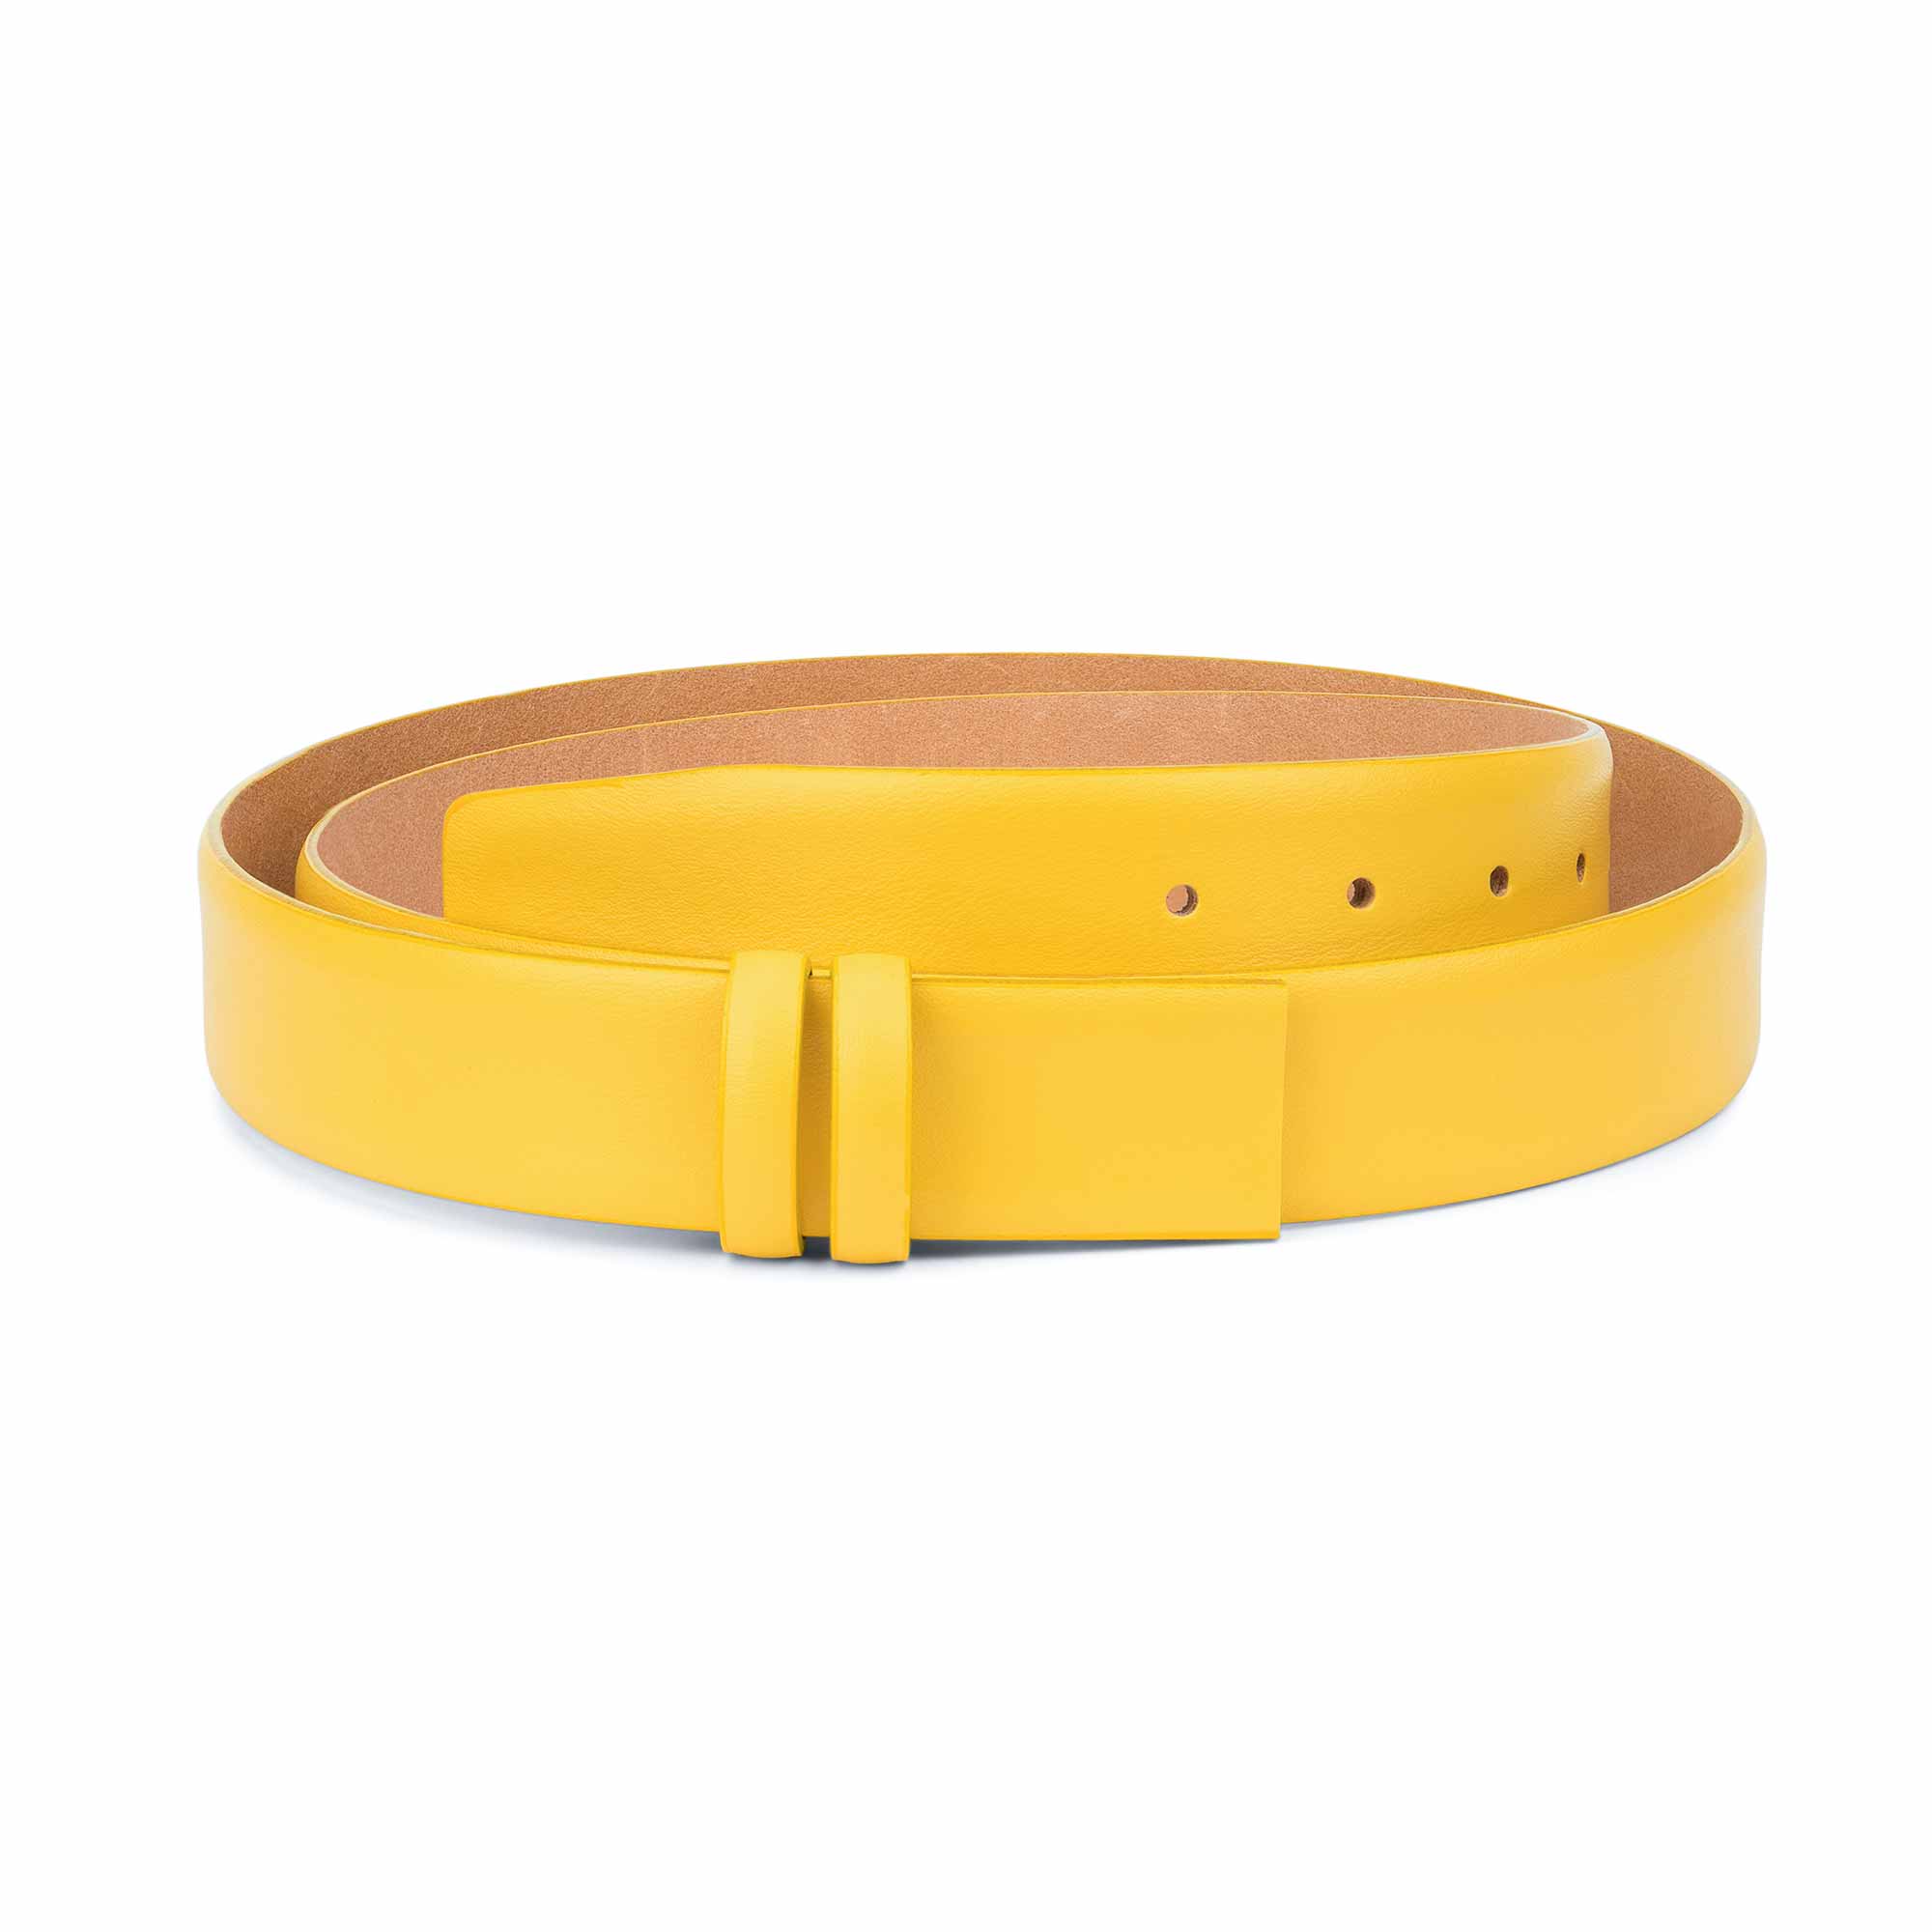 Yellow belt Mens Womens Genuine leather belt Without buckle Adjustable strap | eBay